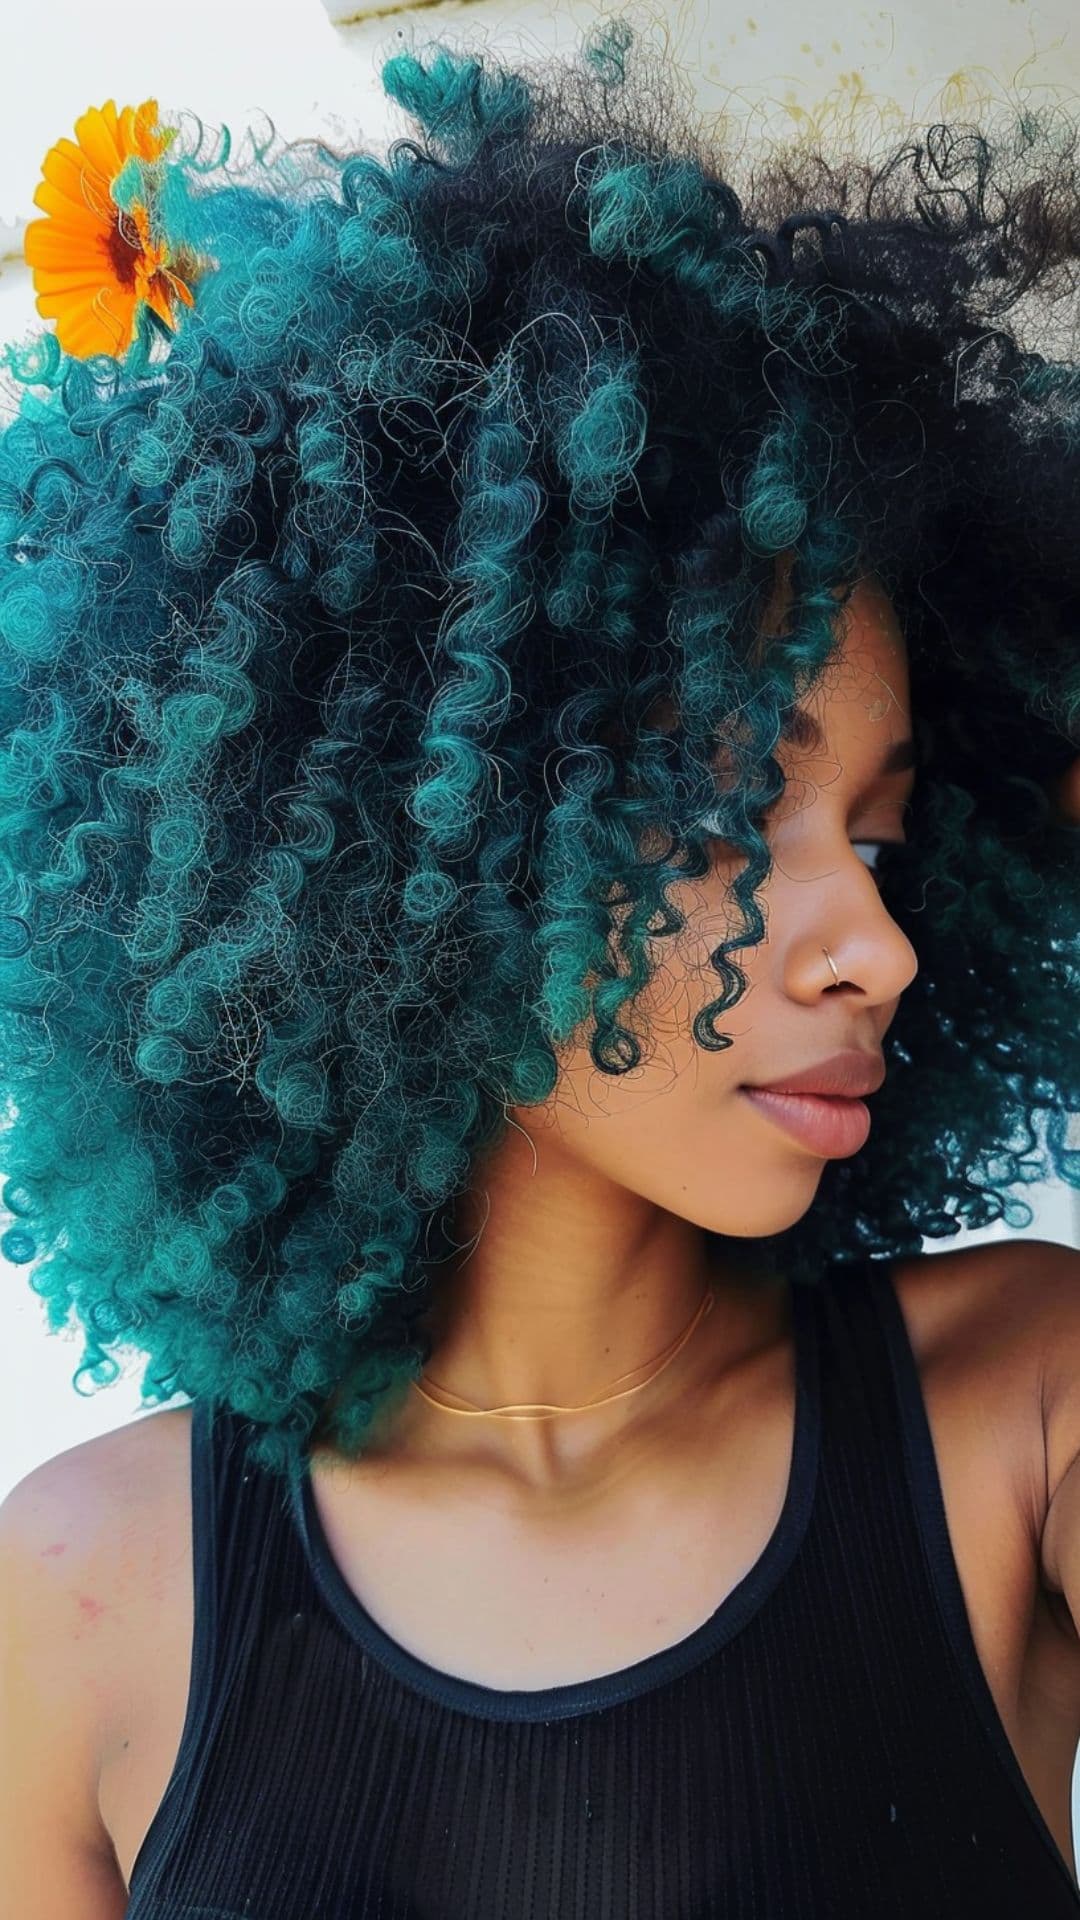 A black woman modelling a teal afro hair.